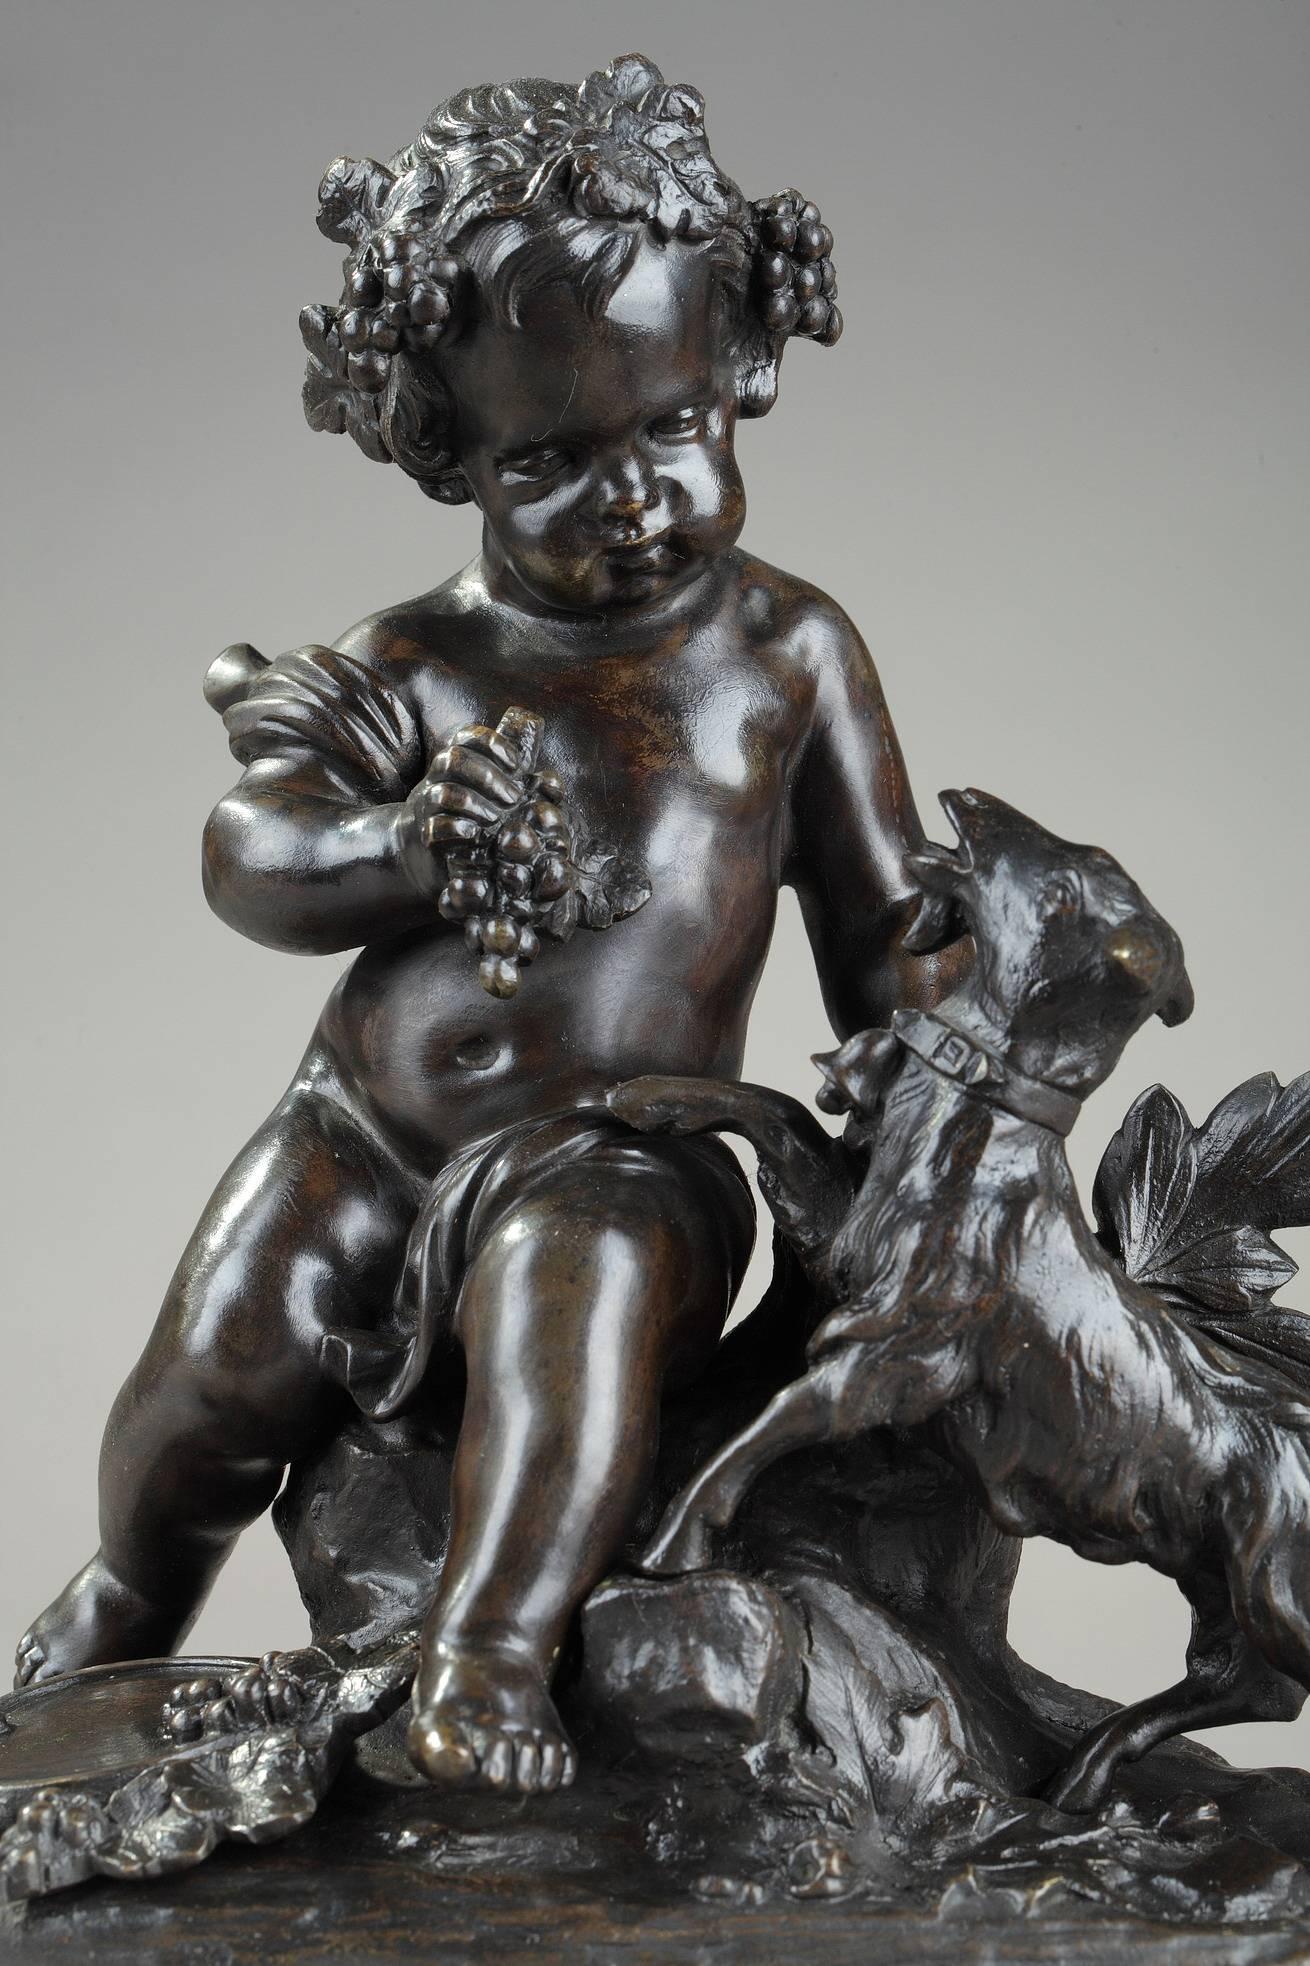 Small bronze group with brown patina featuring Bacchus child, playing with a billy goat. He is crowned with vine branches and holds a bunch of grapes. A tambourine and several grapes are spread at his feet. The crown of vine branches, the billy goat